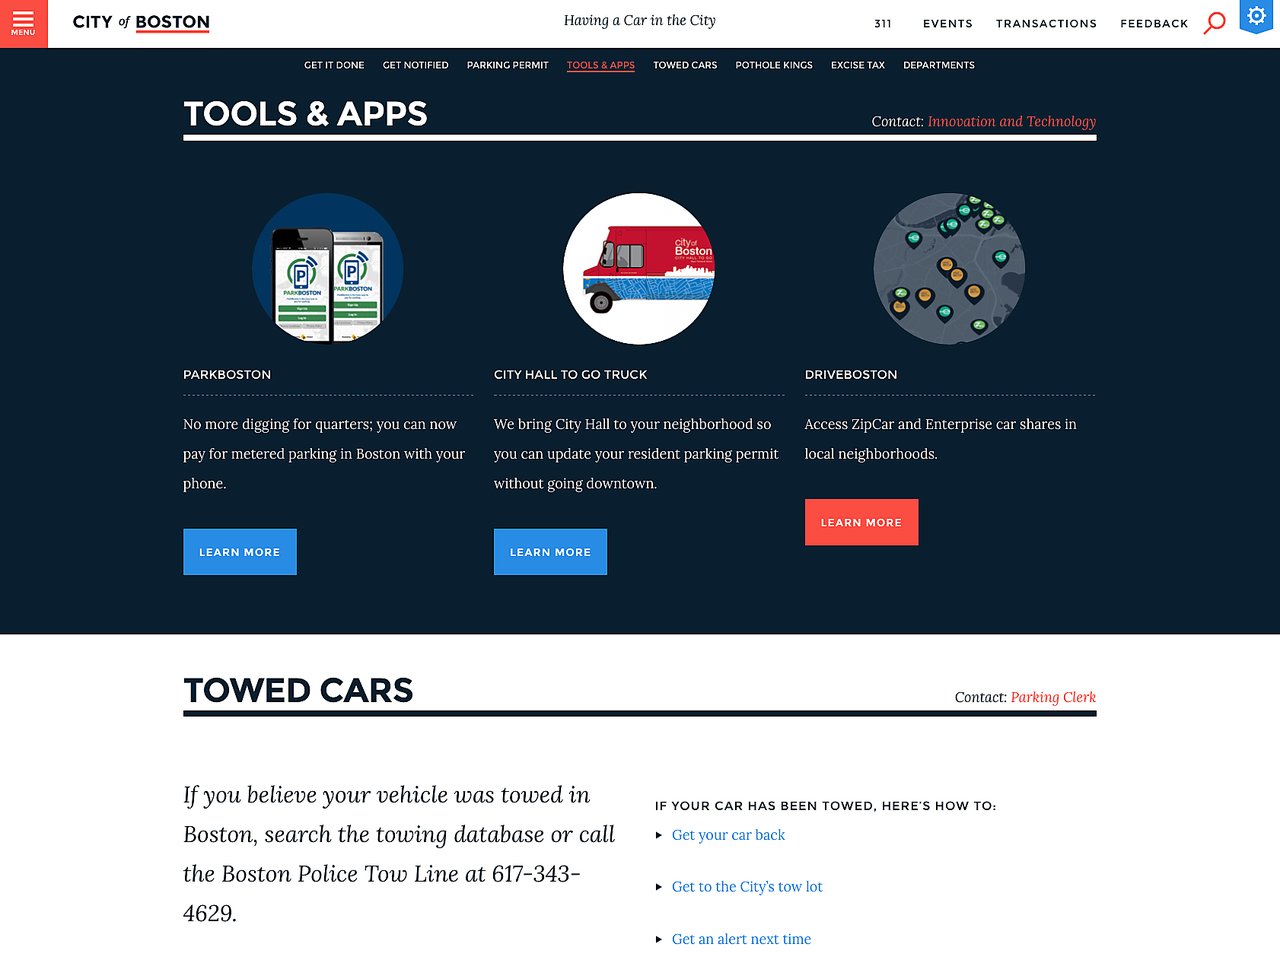 Boston gov tools and apps